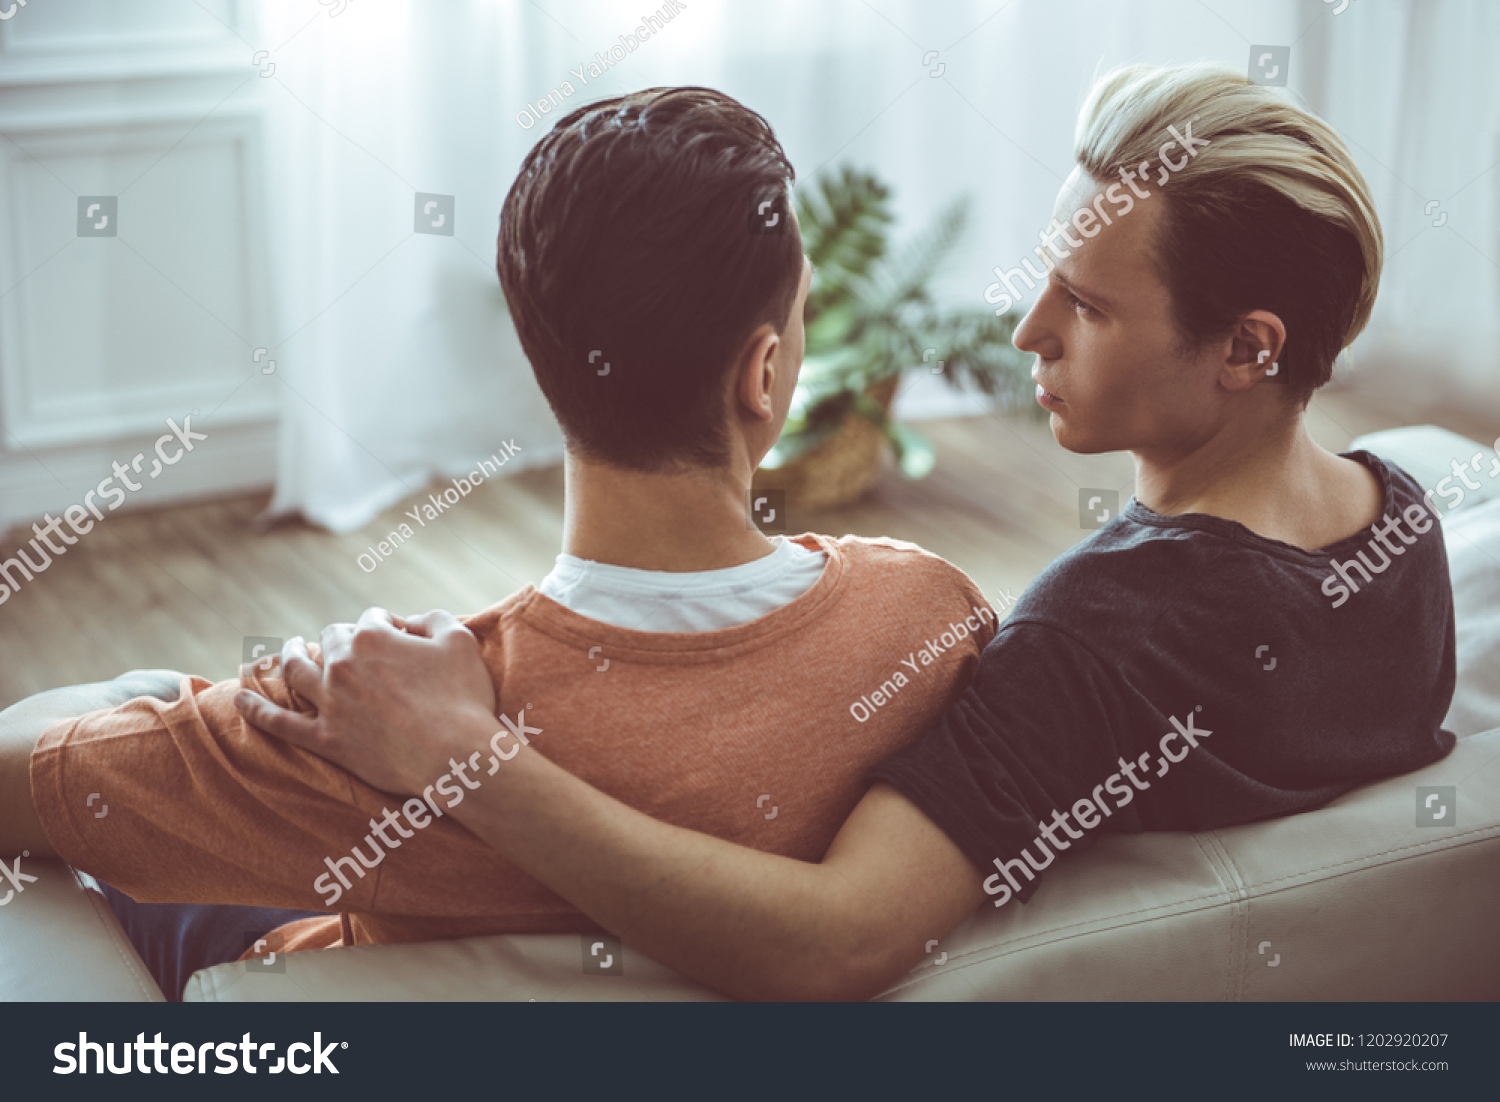 Back view portrait of young man with dyed hair hugging boyfriend and gazing at him. They are resting on sofa at home #1202920207